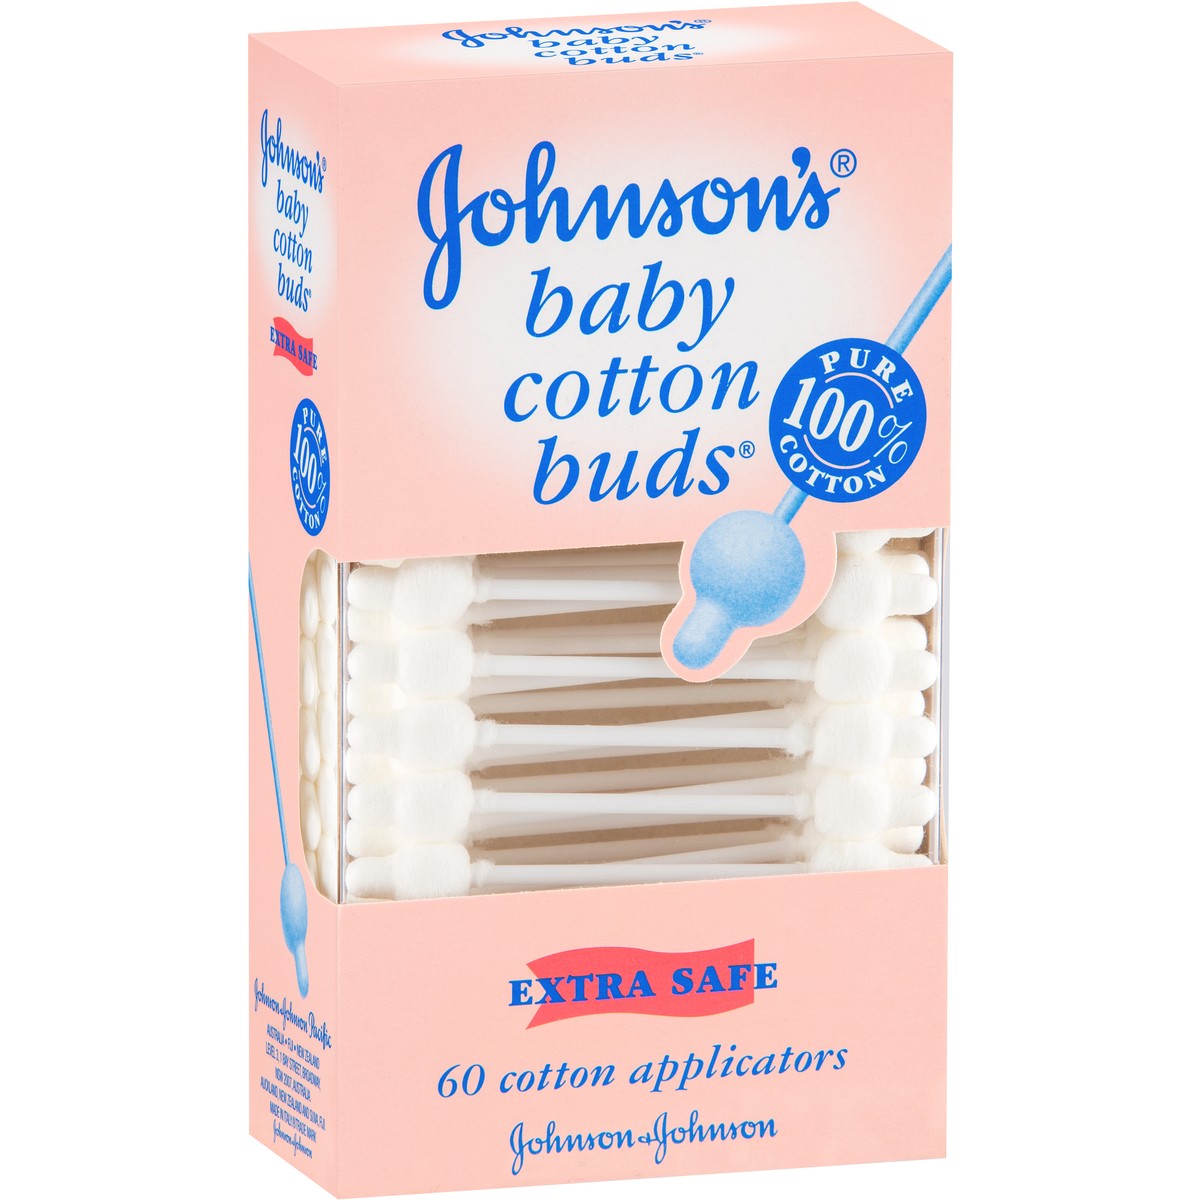 Baby cotton buds